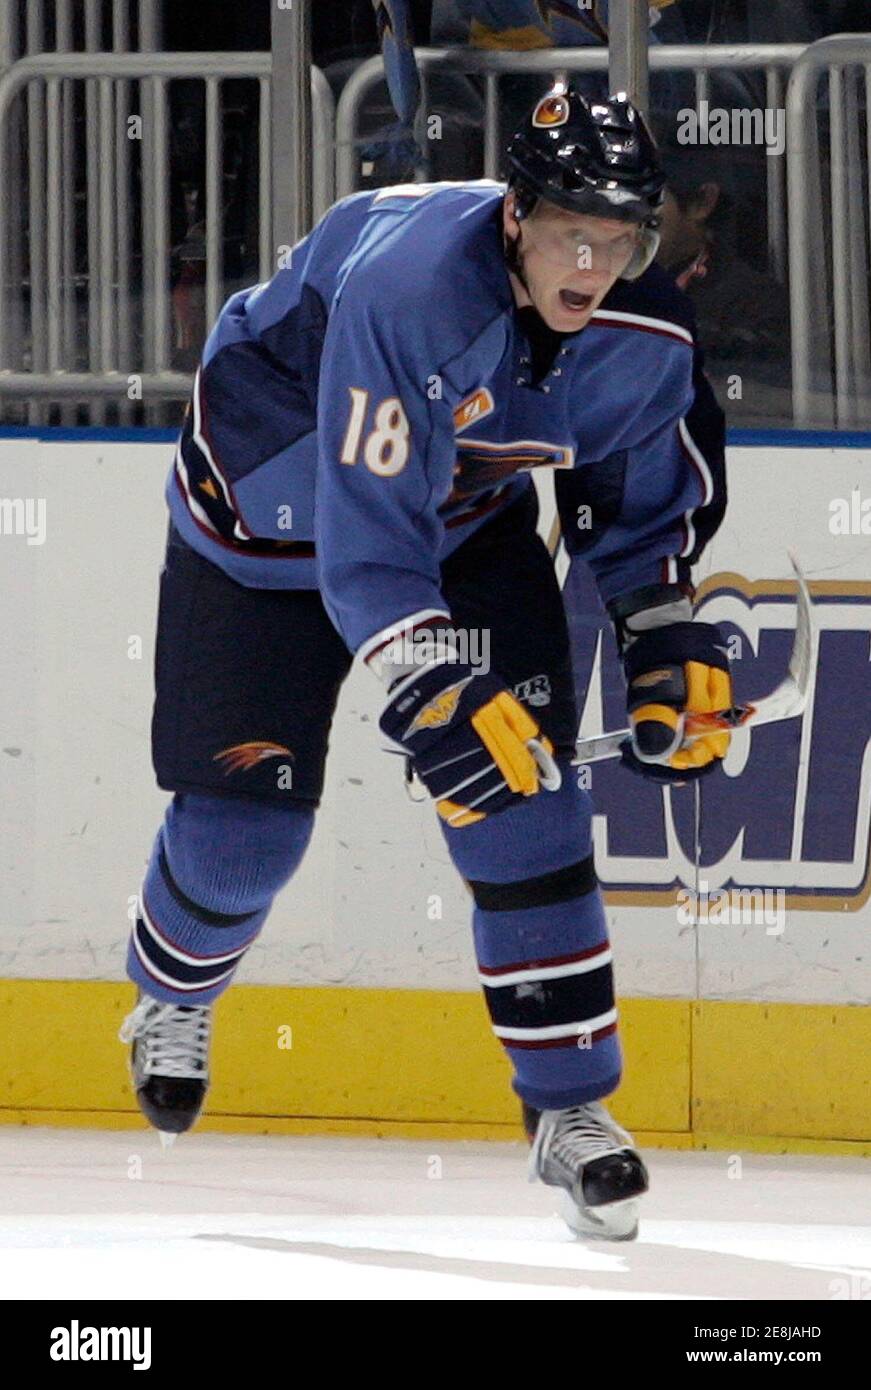 Atlanta Thrashers right wing Marian Hossa (18) reacts after scoring a goal  against the Pittsburgh Penguins during a shootout at their NHL hockey game  in Atlanta, Georgia December 21, 2006. REUTERS/Tami Chappell (